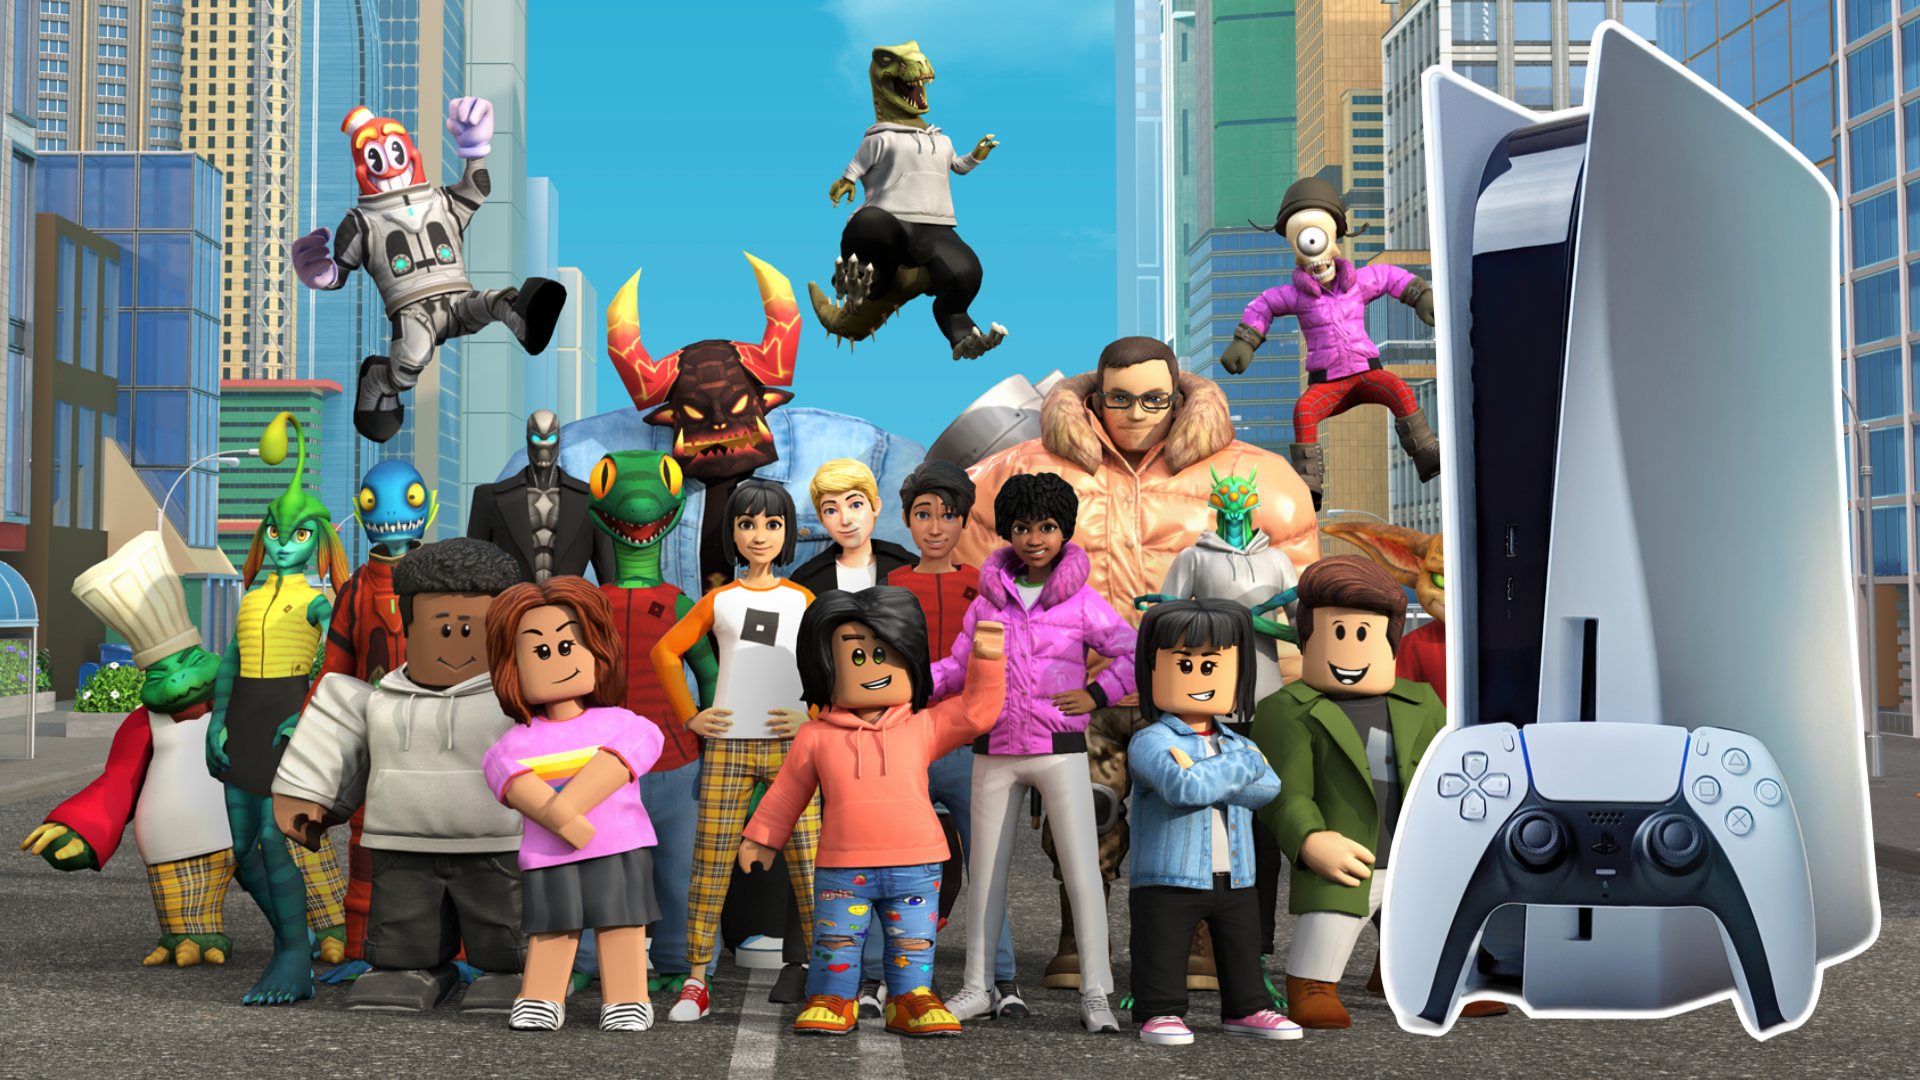 Roblox's Console Evolution: PlayStation Debut, Realistic Avatars: What's  Next for Gamers? - Roblox (NYSE:RBLX) - Benzinga